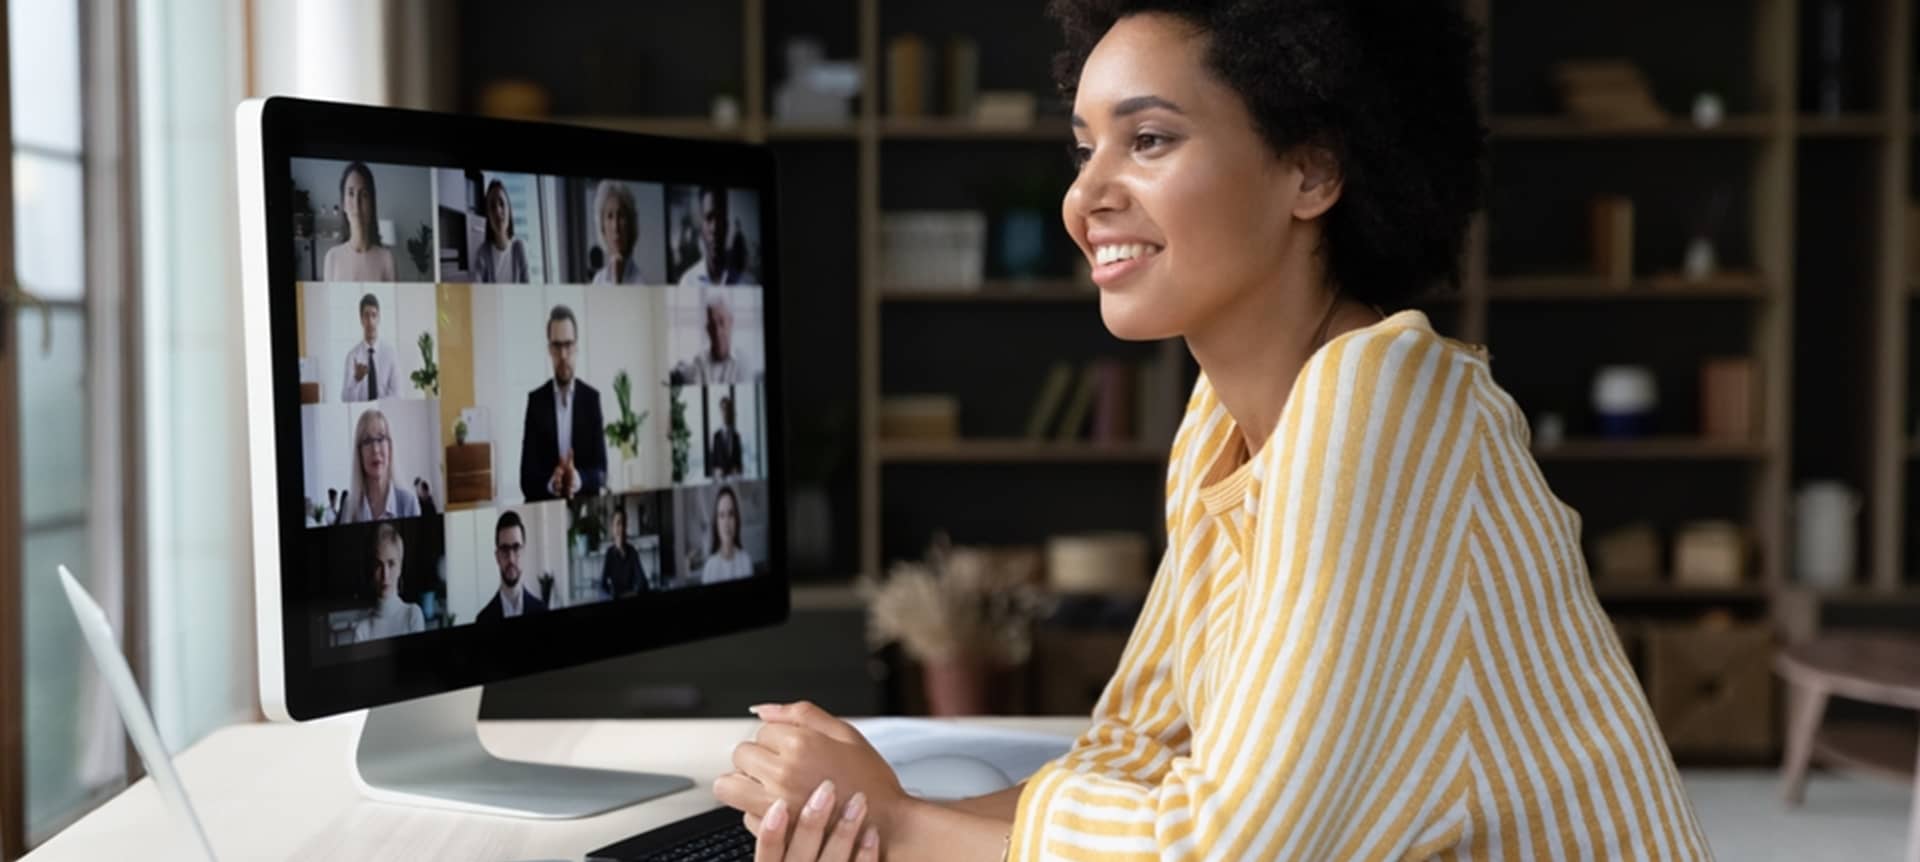 4 Easy Ways to Upskill Your Workforce Through Video Interviewing Software